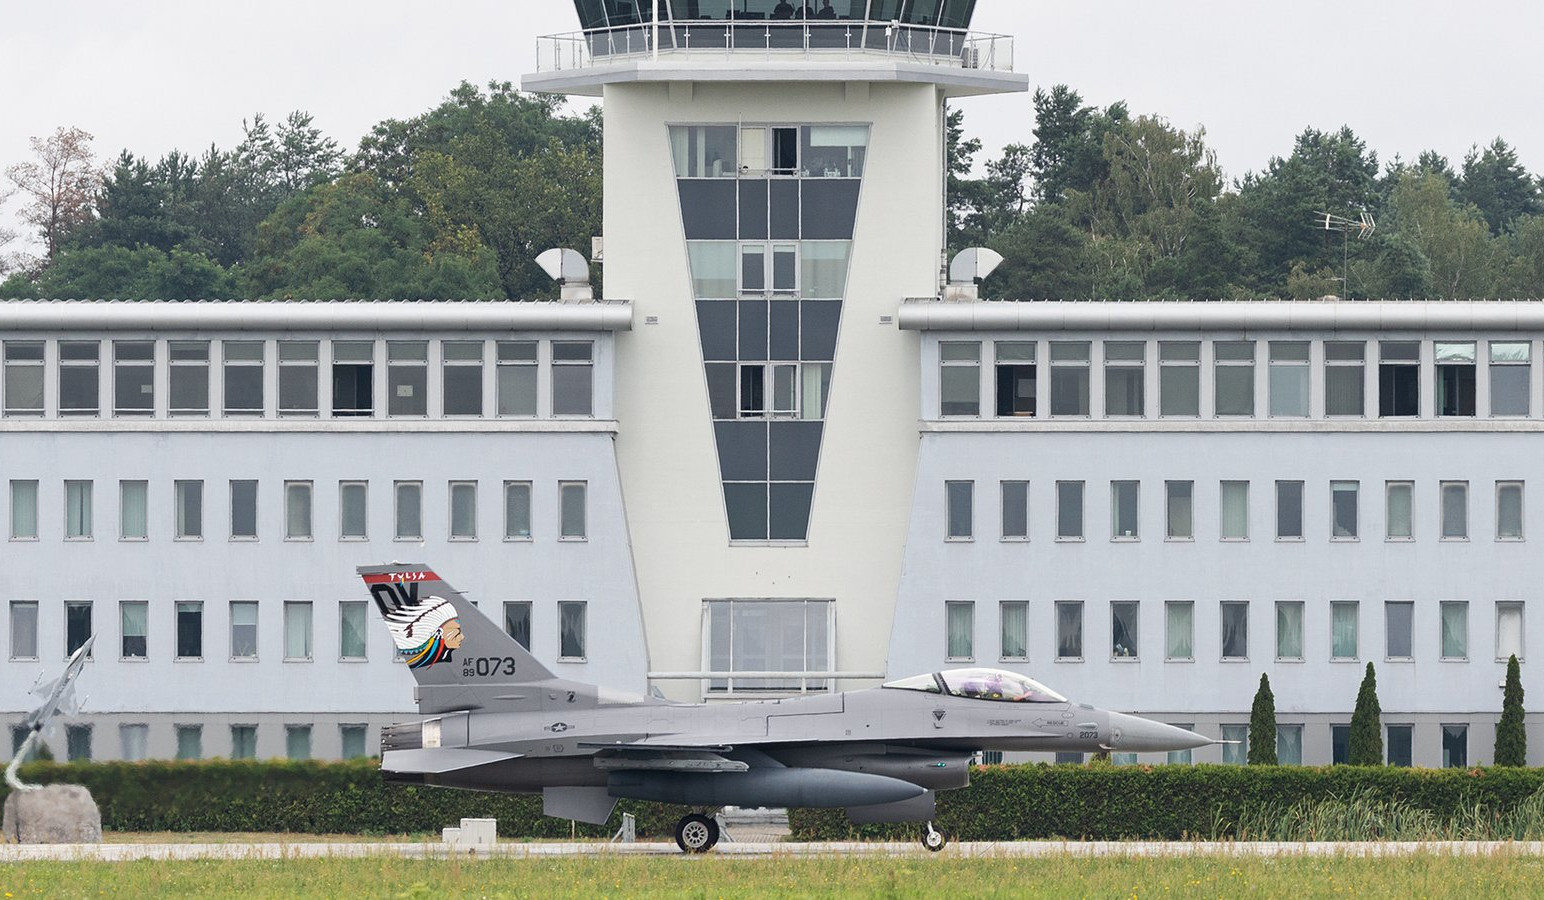 Joint Polish-American exercises using F-16 fighter jets started in Poland